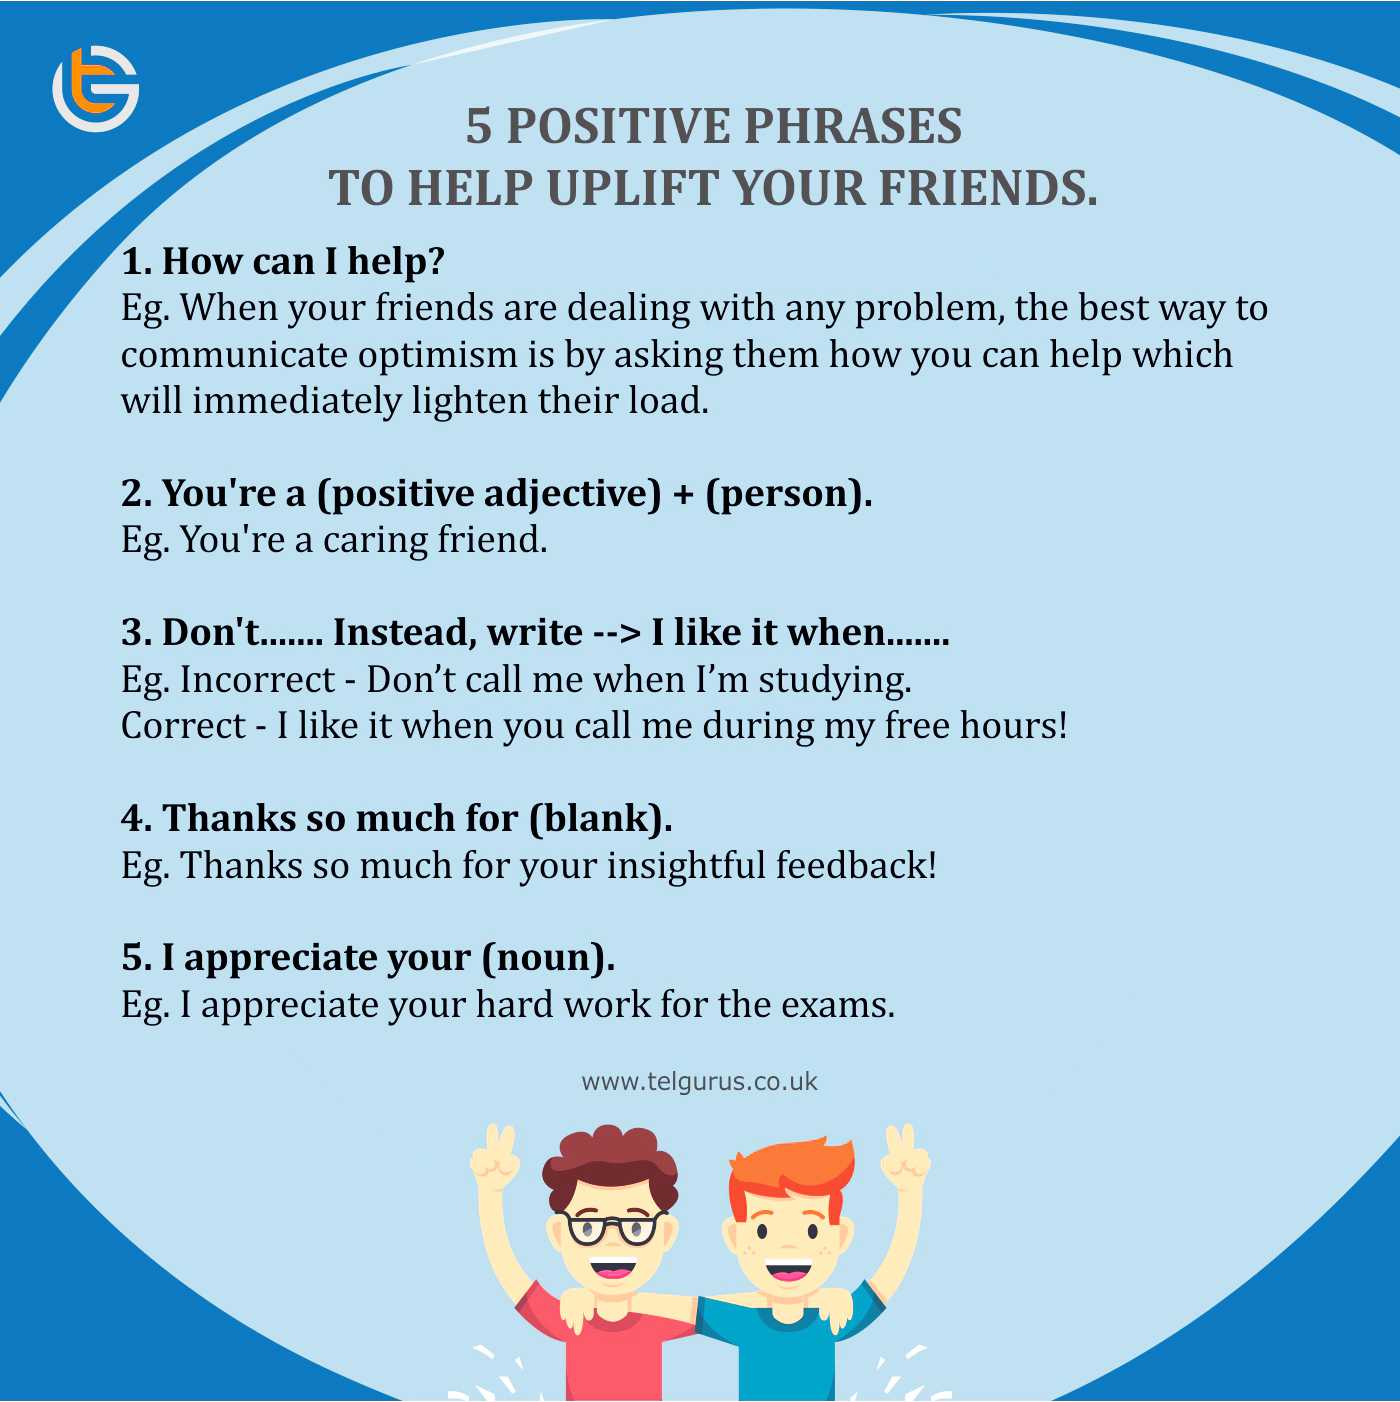 5 postive phrases to help uplife your friends